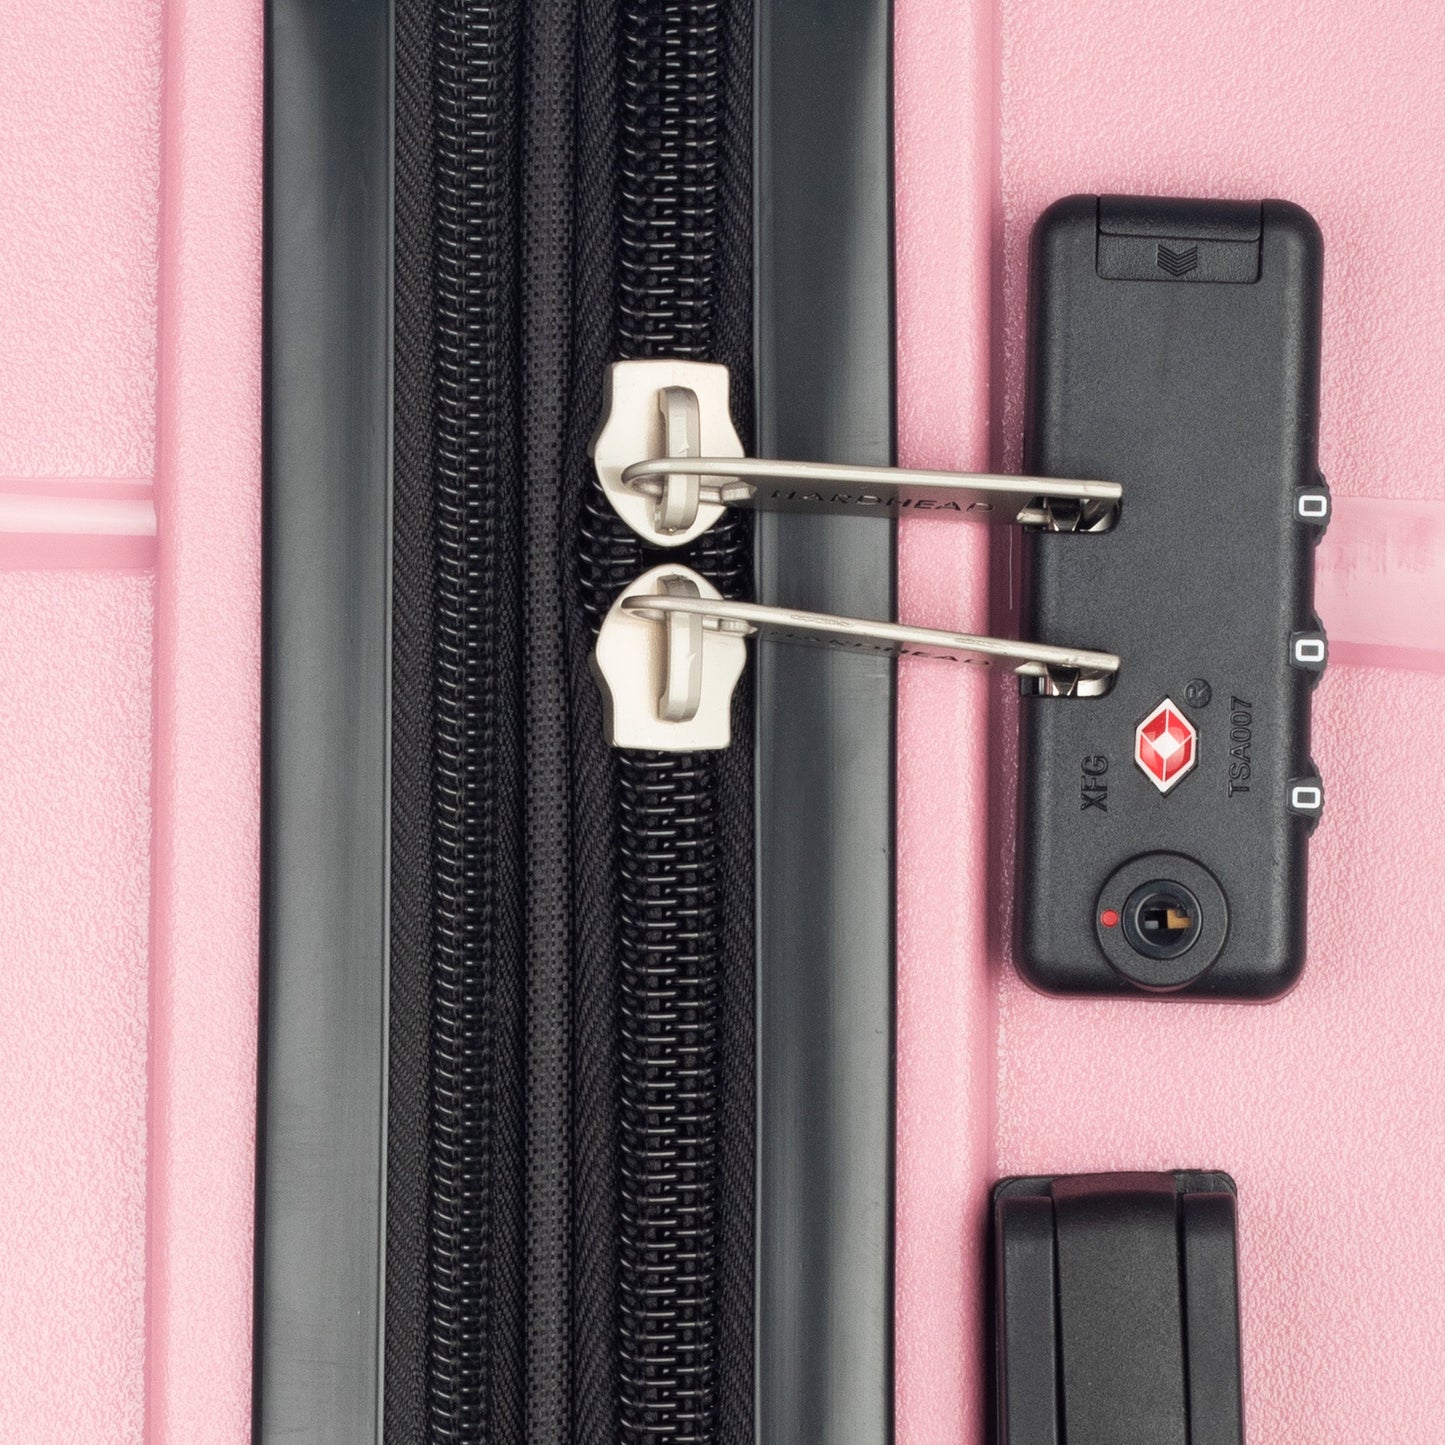 Ian collection pink luggage (21") Suitcase Lock Spinner